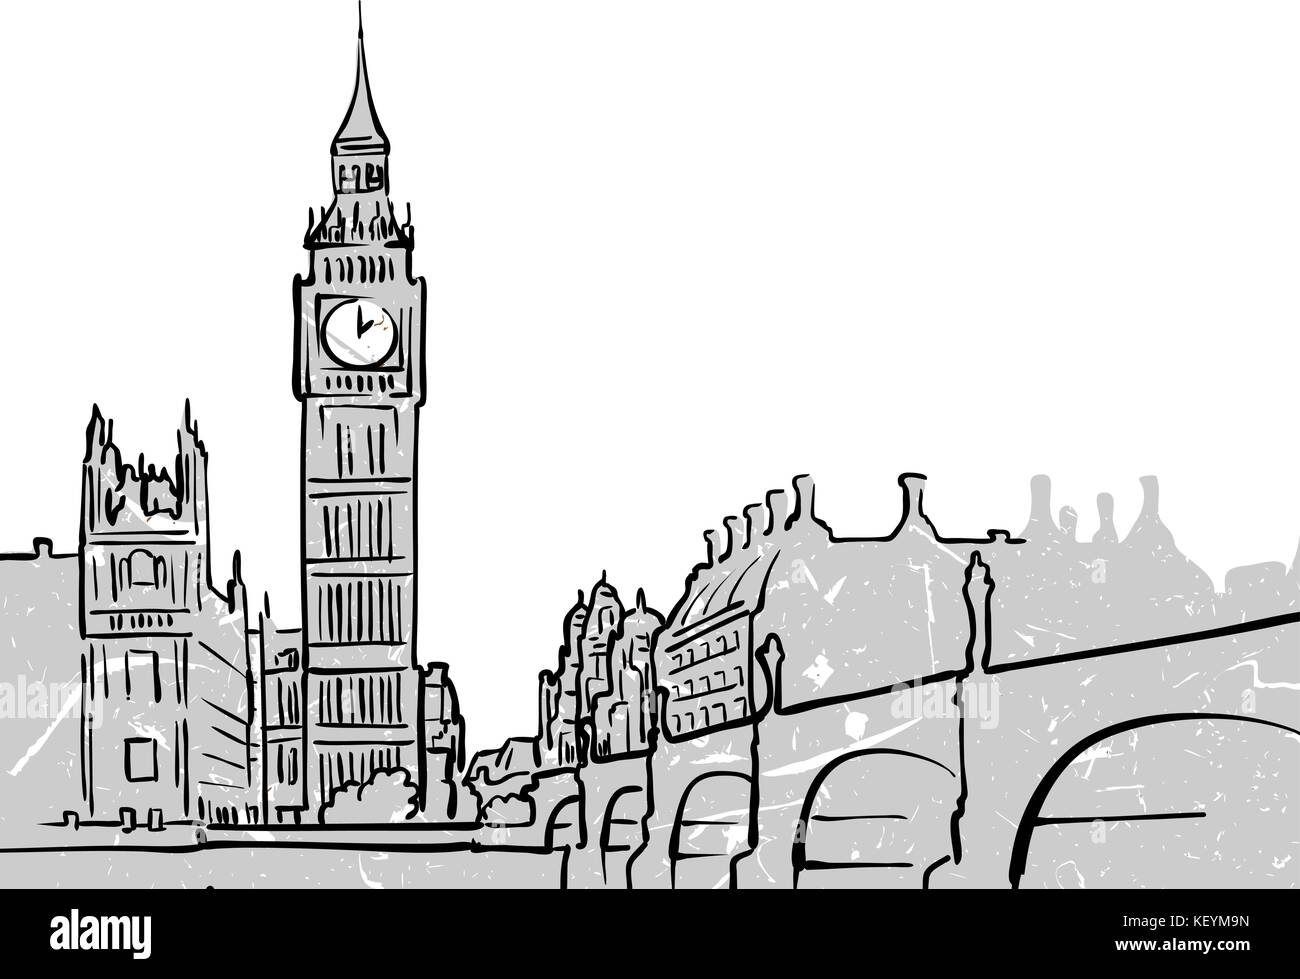 London, United Kingdom famous Travel Sketch. Lineart drawing by hand. Greeting card design, vector illustration Stock Vector